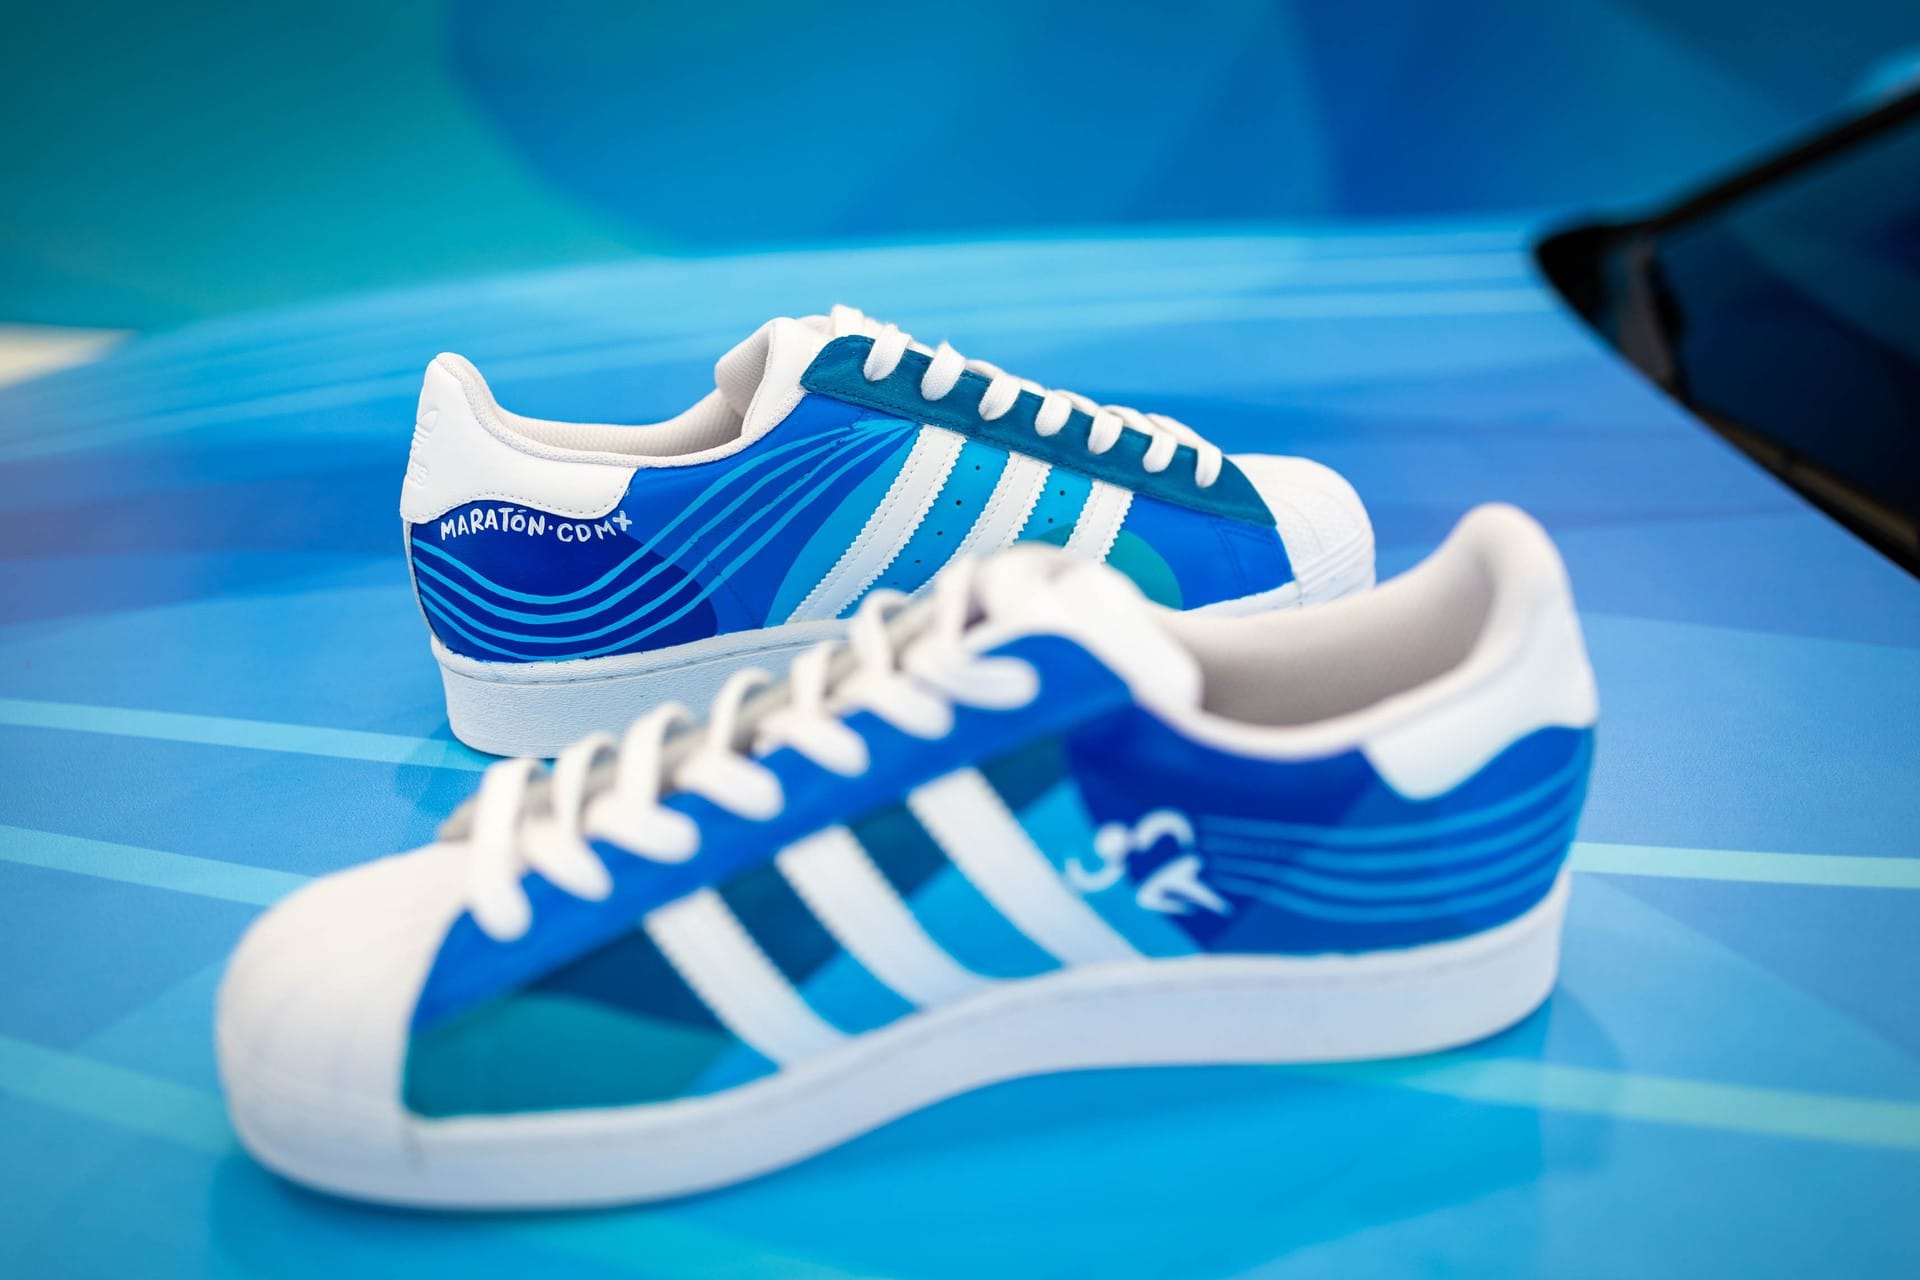 emulsion Collecting leaves Specificity BMW x Adidas releases limited edition Superstar tennis sneakers